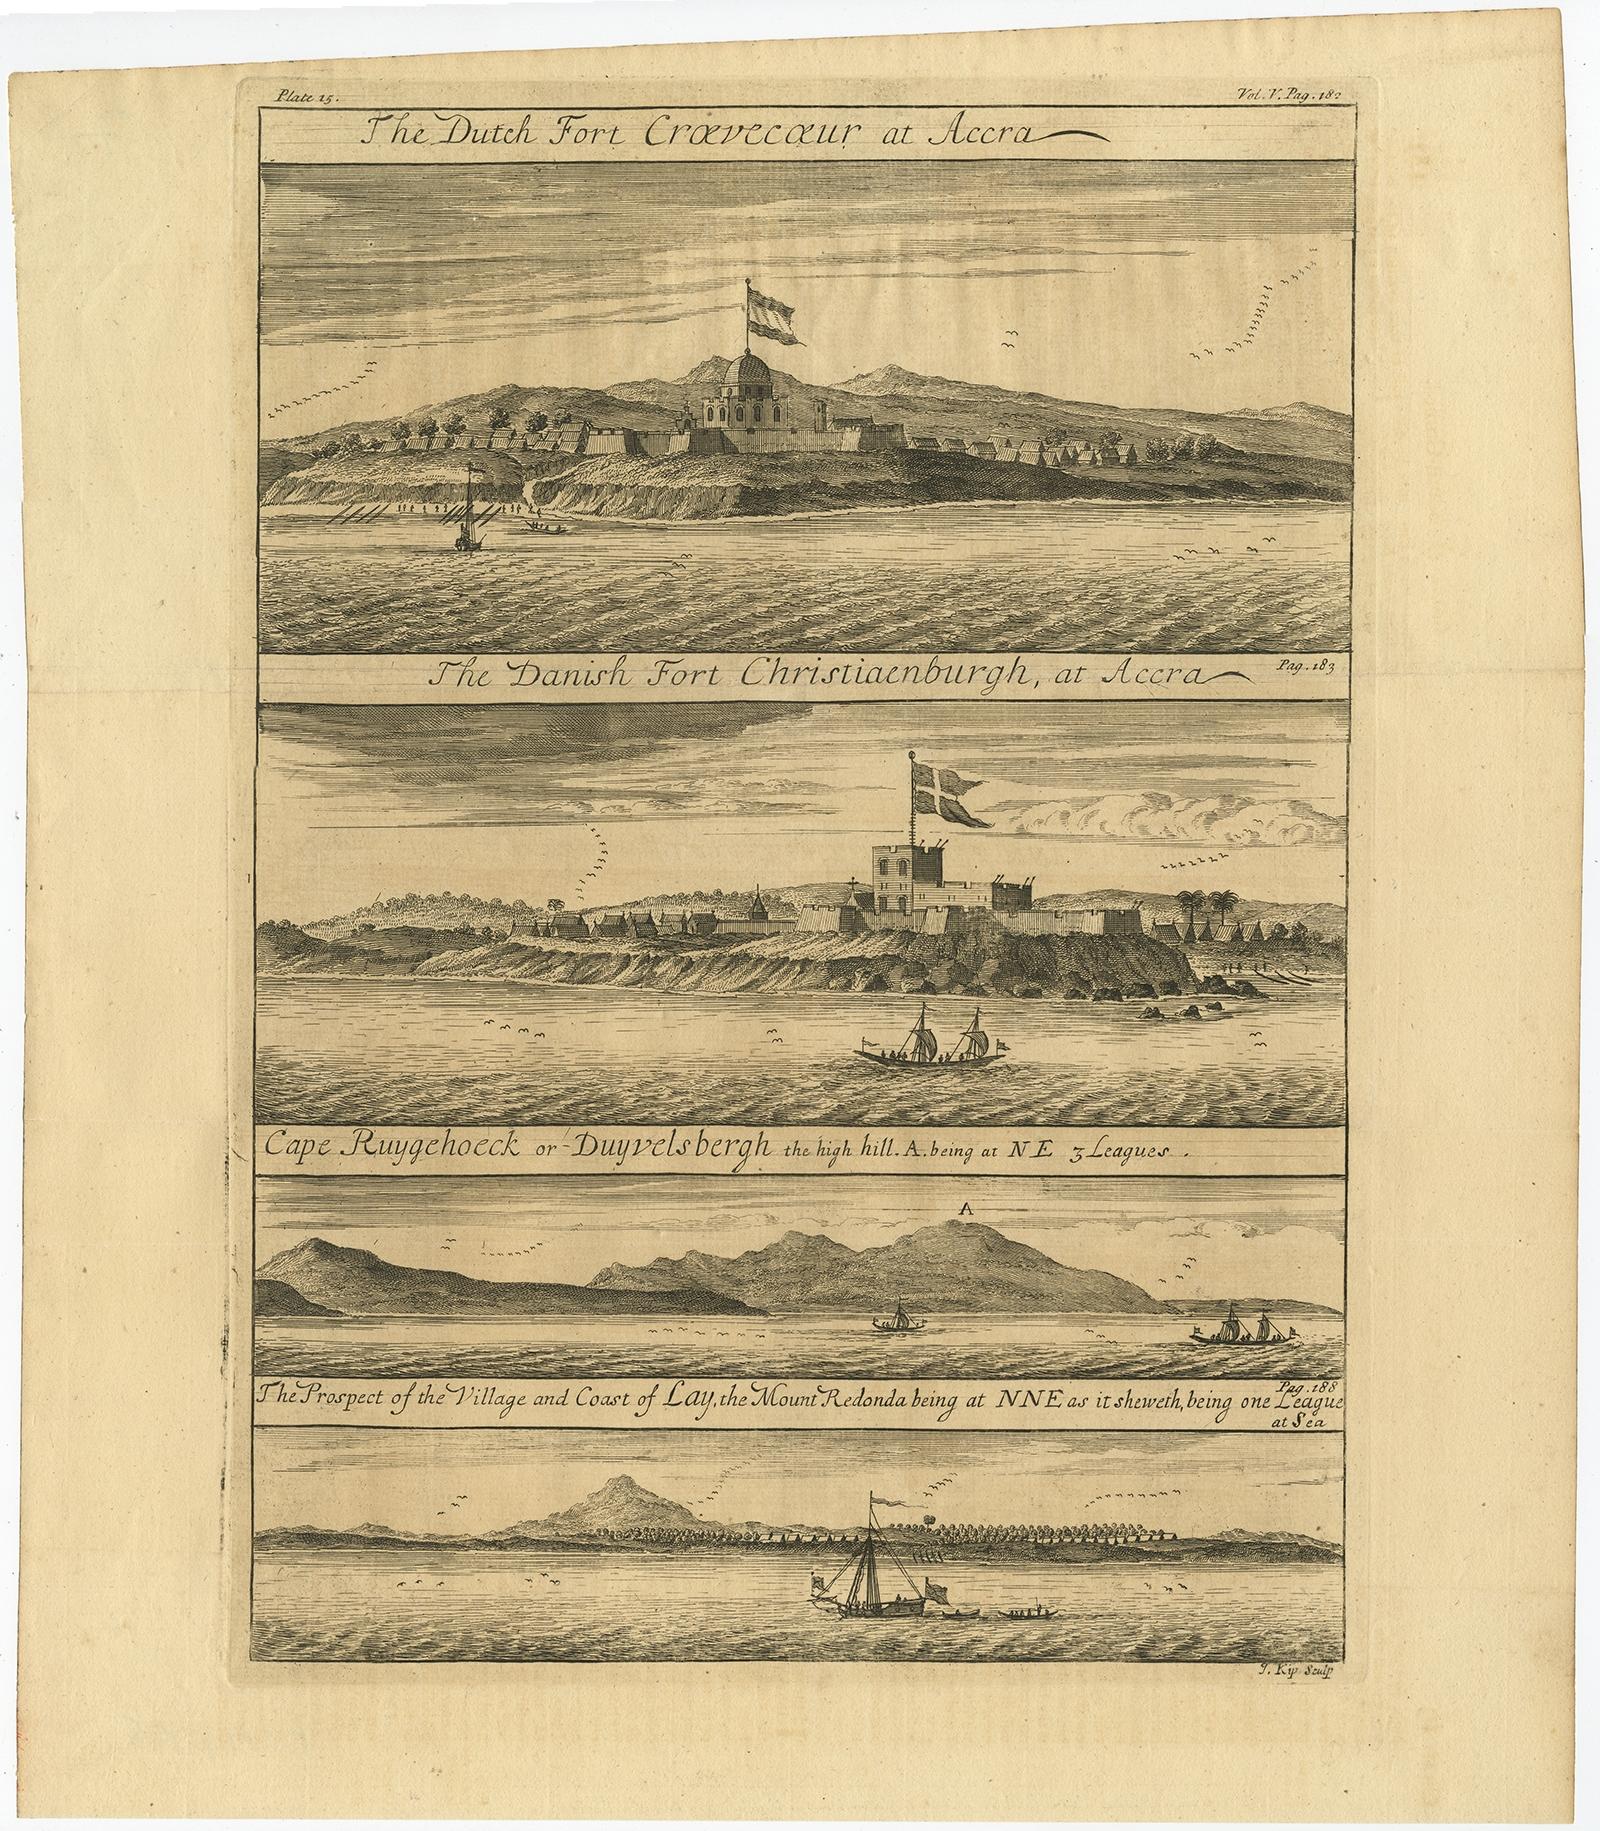 Antique print, titled: 'The Dutch Fort Croevecoeur (…).' 

A four panel plate showing forts on the West African Gold Coast, Ghana; a) The Dutch Fort Croevecoeur at Accra, b) The Danish Fort Christiaenburgh at Accra, c) Cape Ruygehoeck or